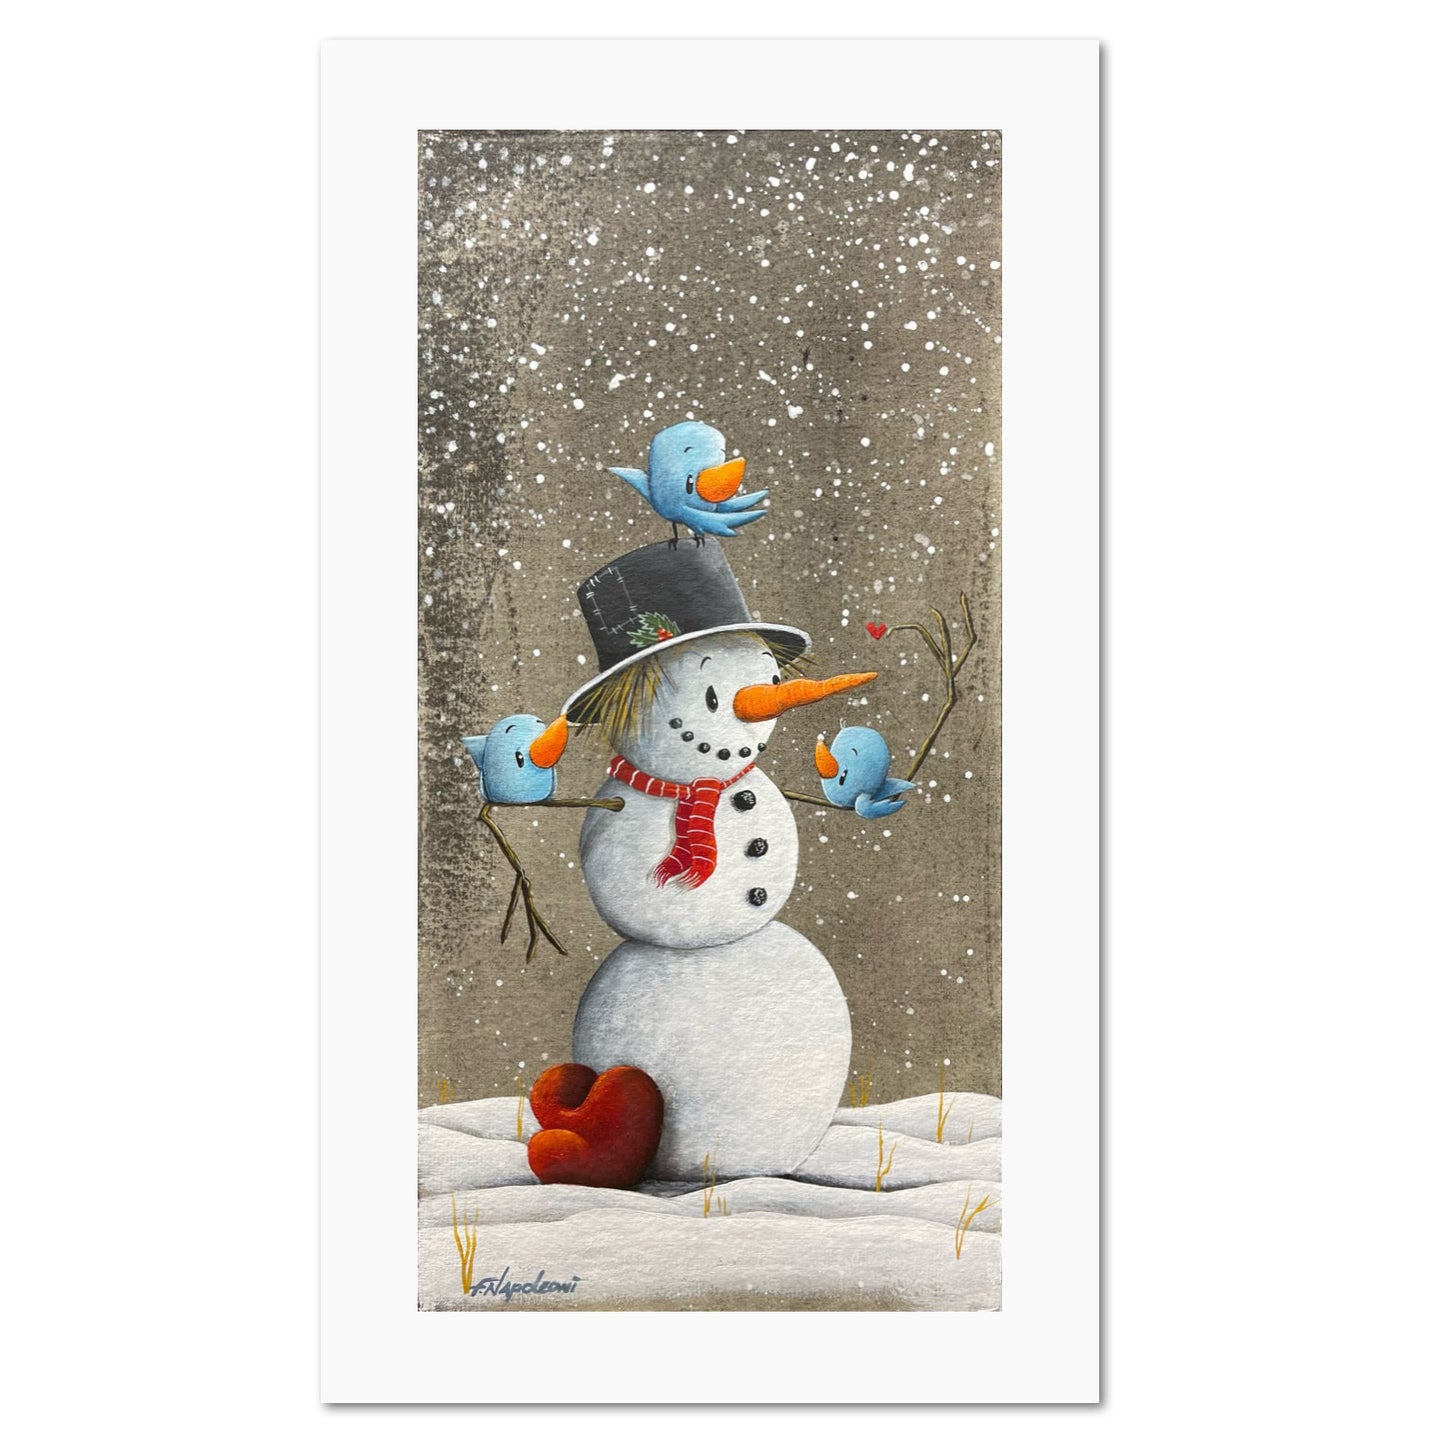 Fabio Napoleoni "Warms Up My Soul" Open Edition Paper Giclee